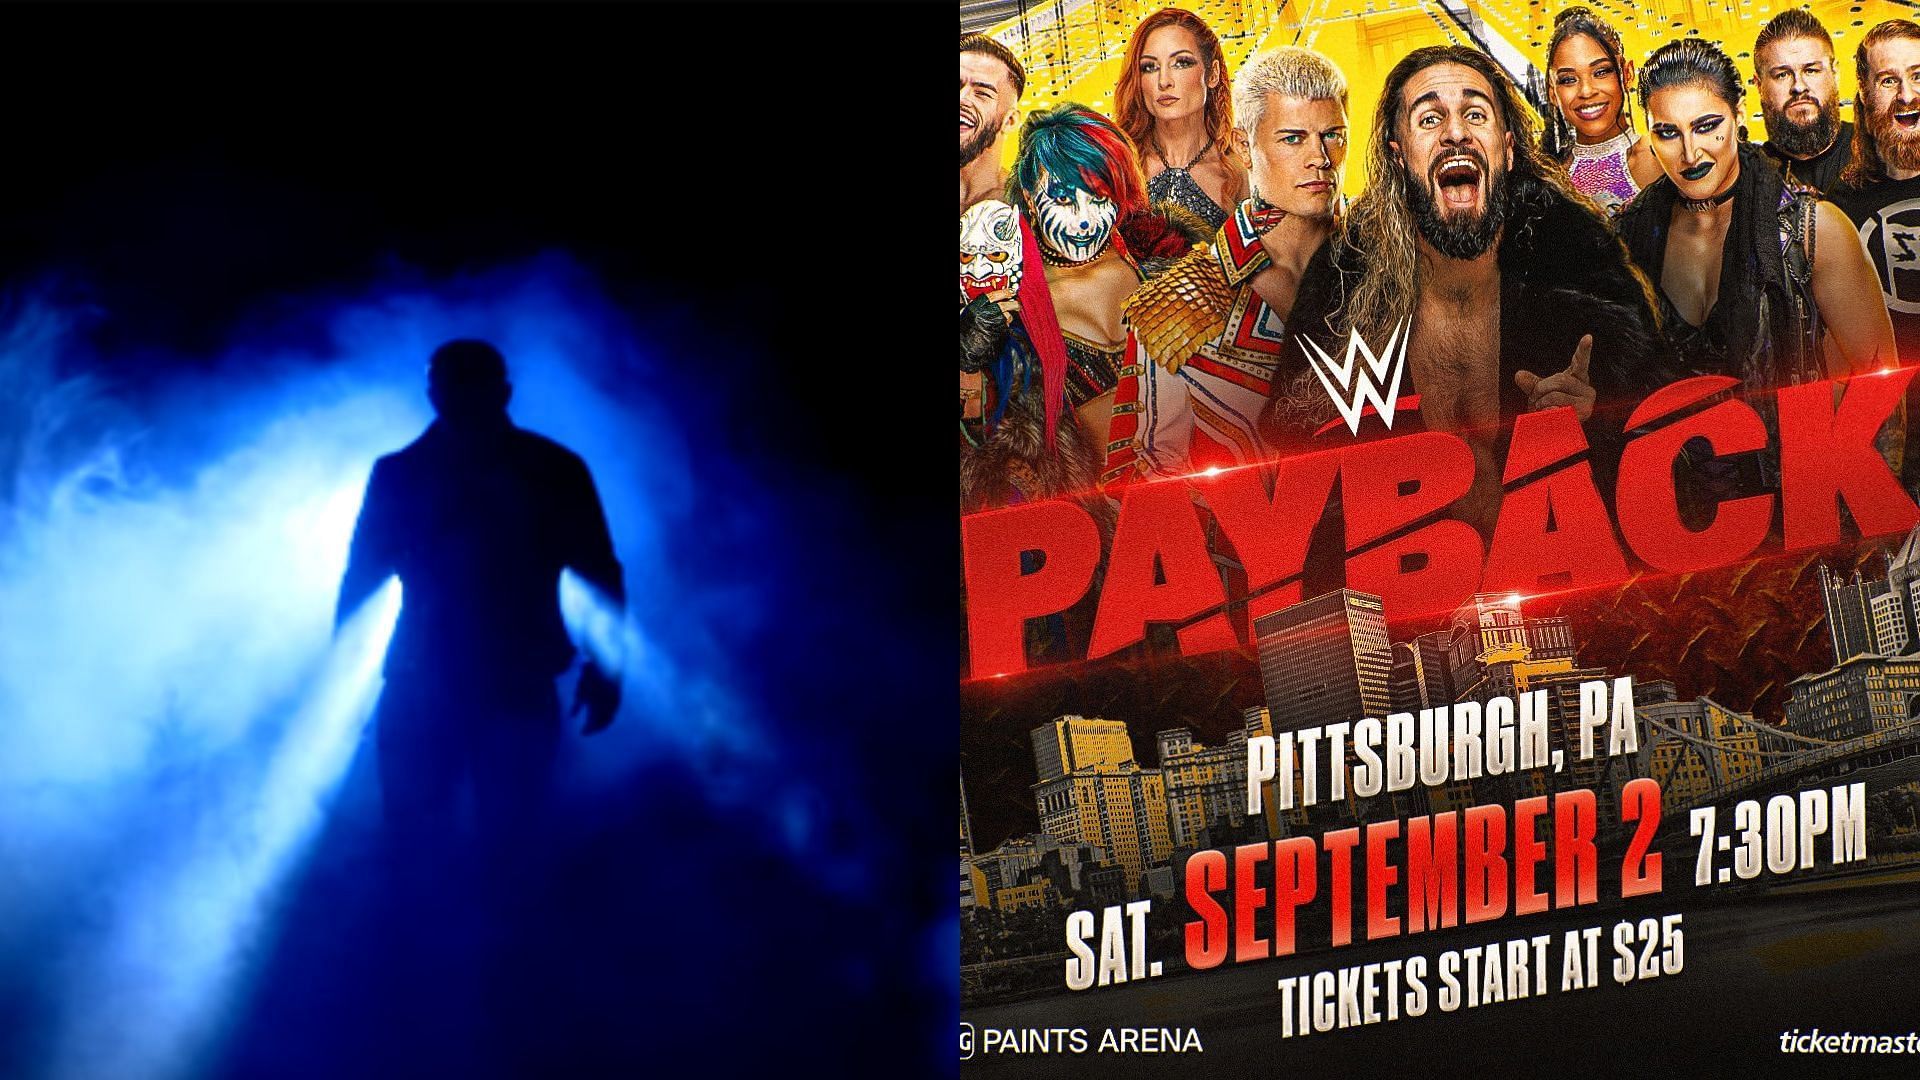 WWE Payback airs live tonight in Pennsylvania.